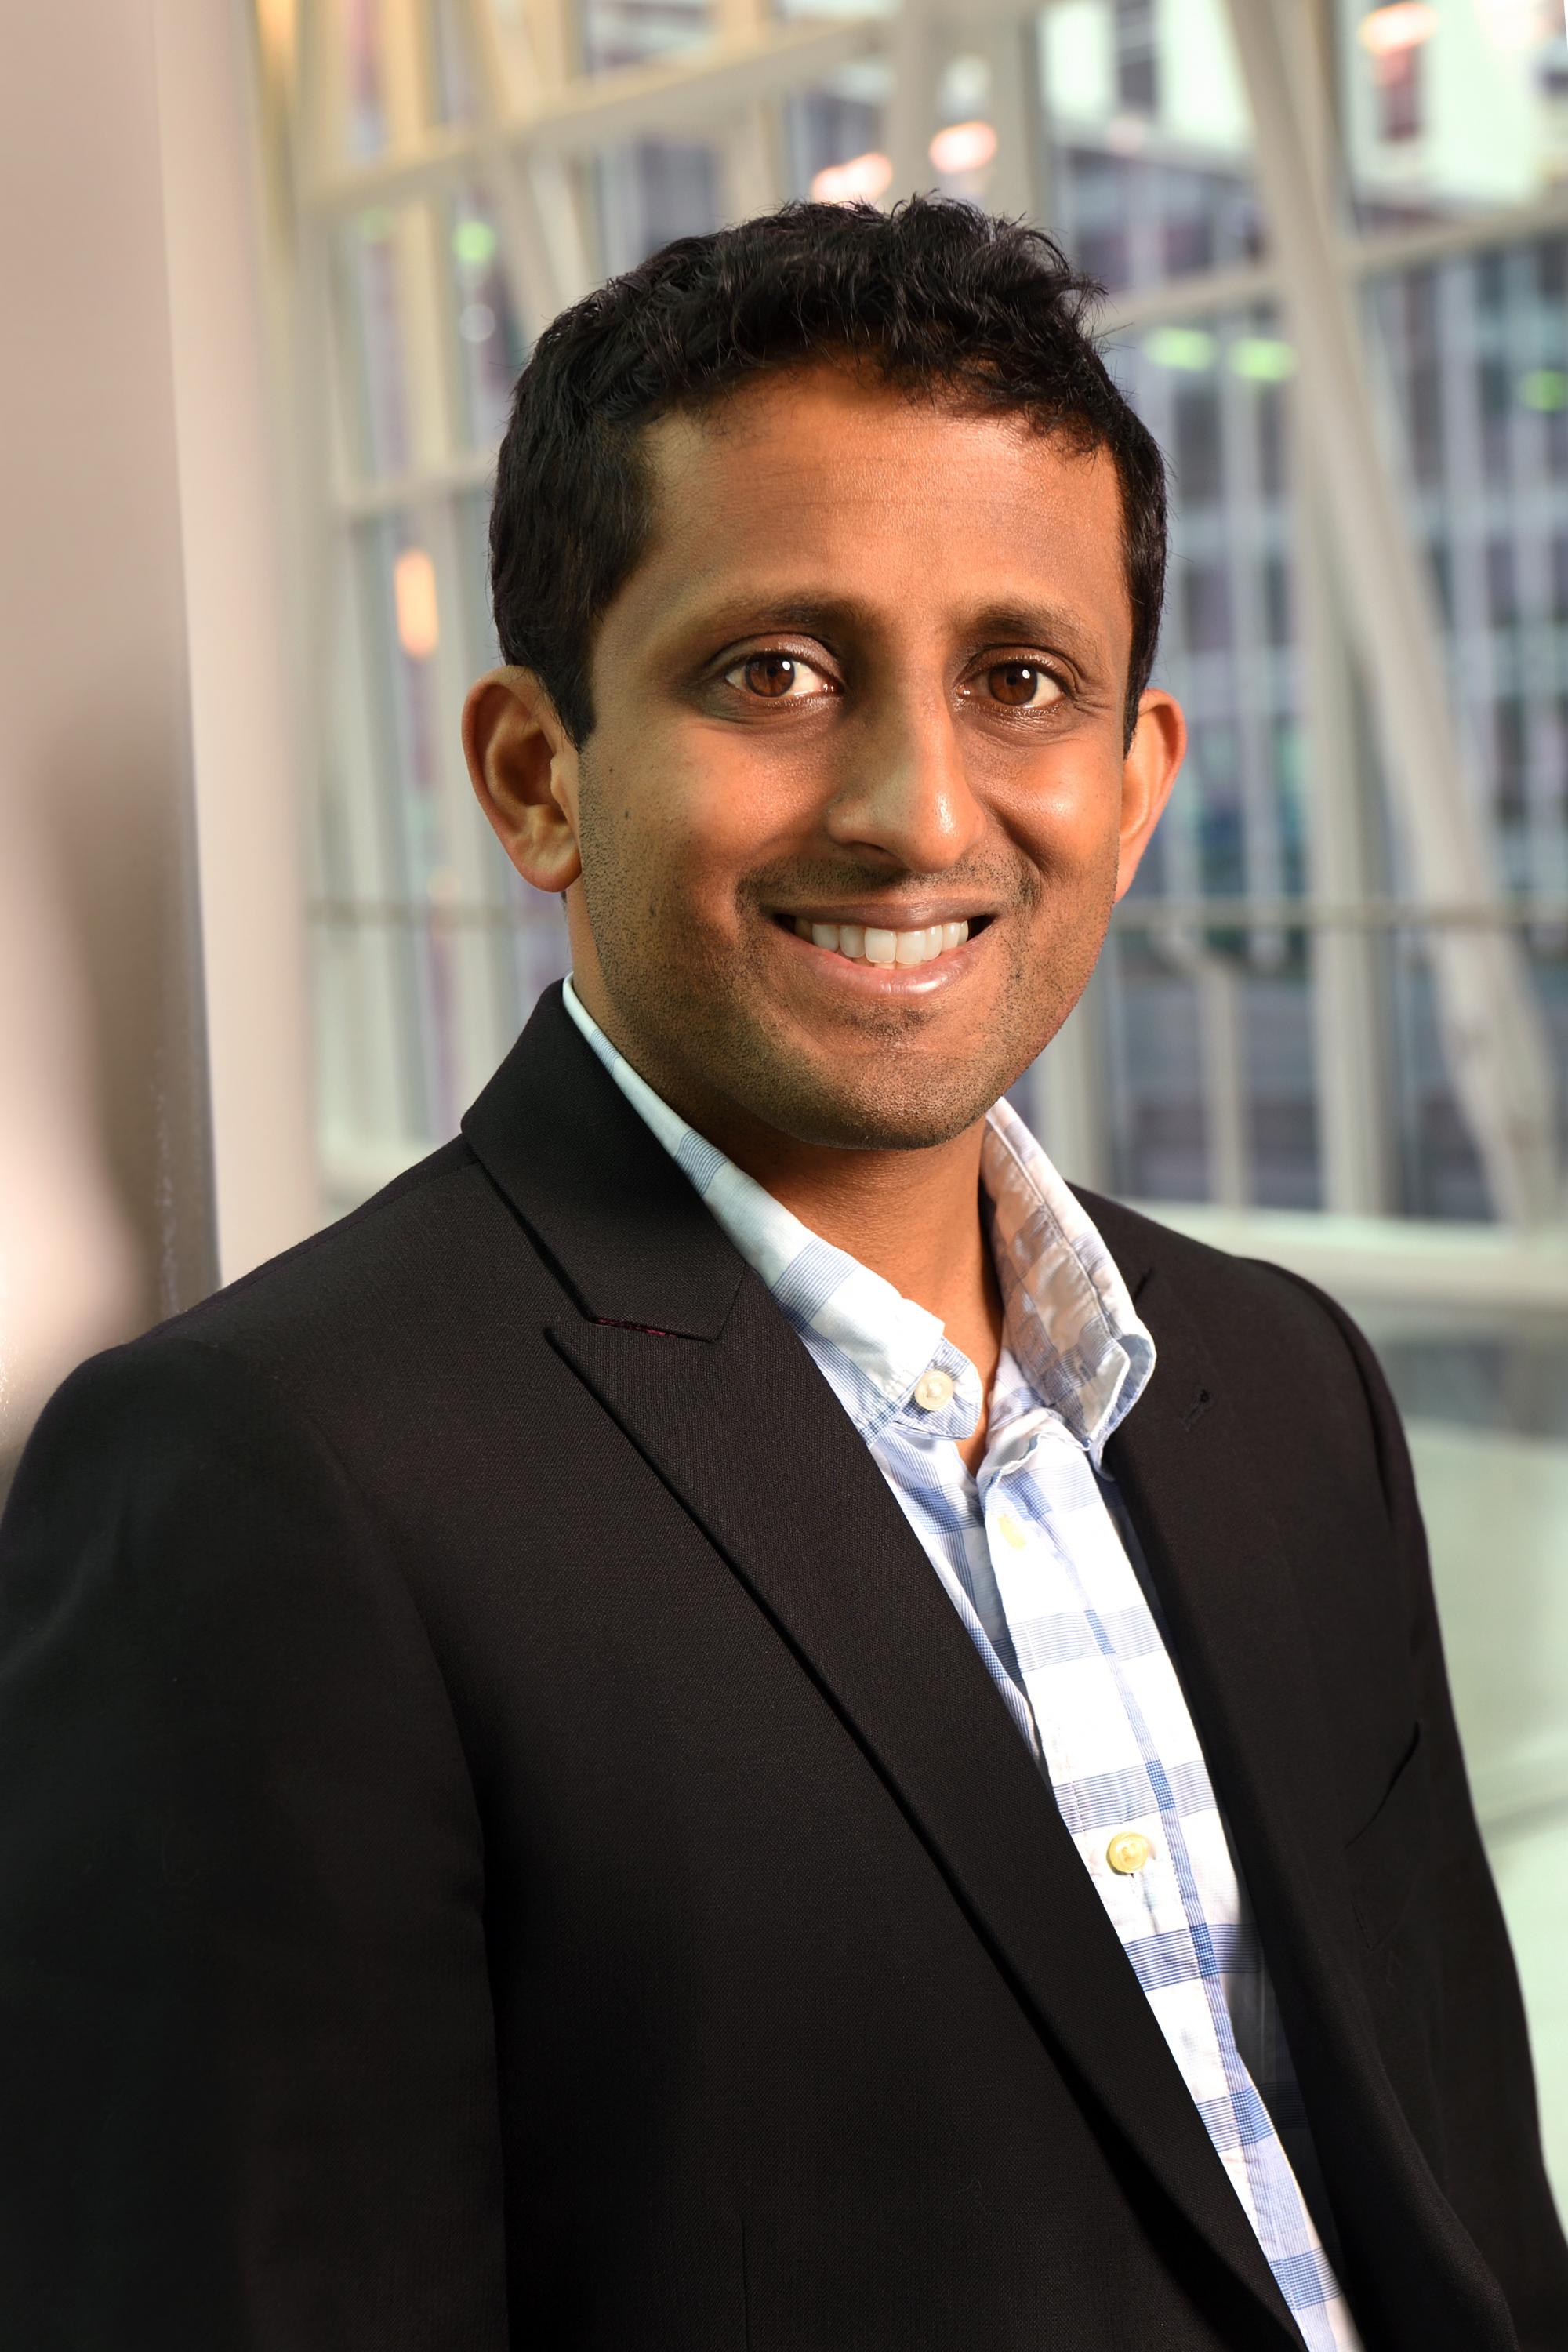 Chethan Pandarinath, assistant professor in the Wallace H. Coulter Department of Biomedical Engineering at Emory University and Georgia Tech